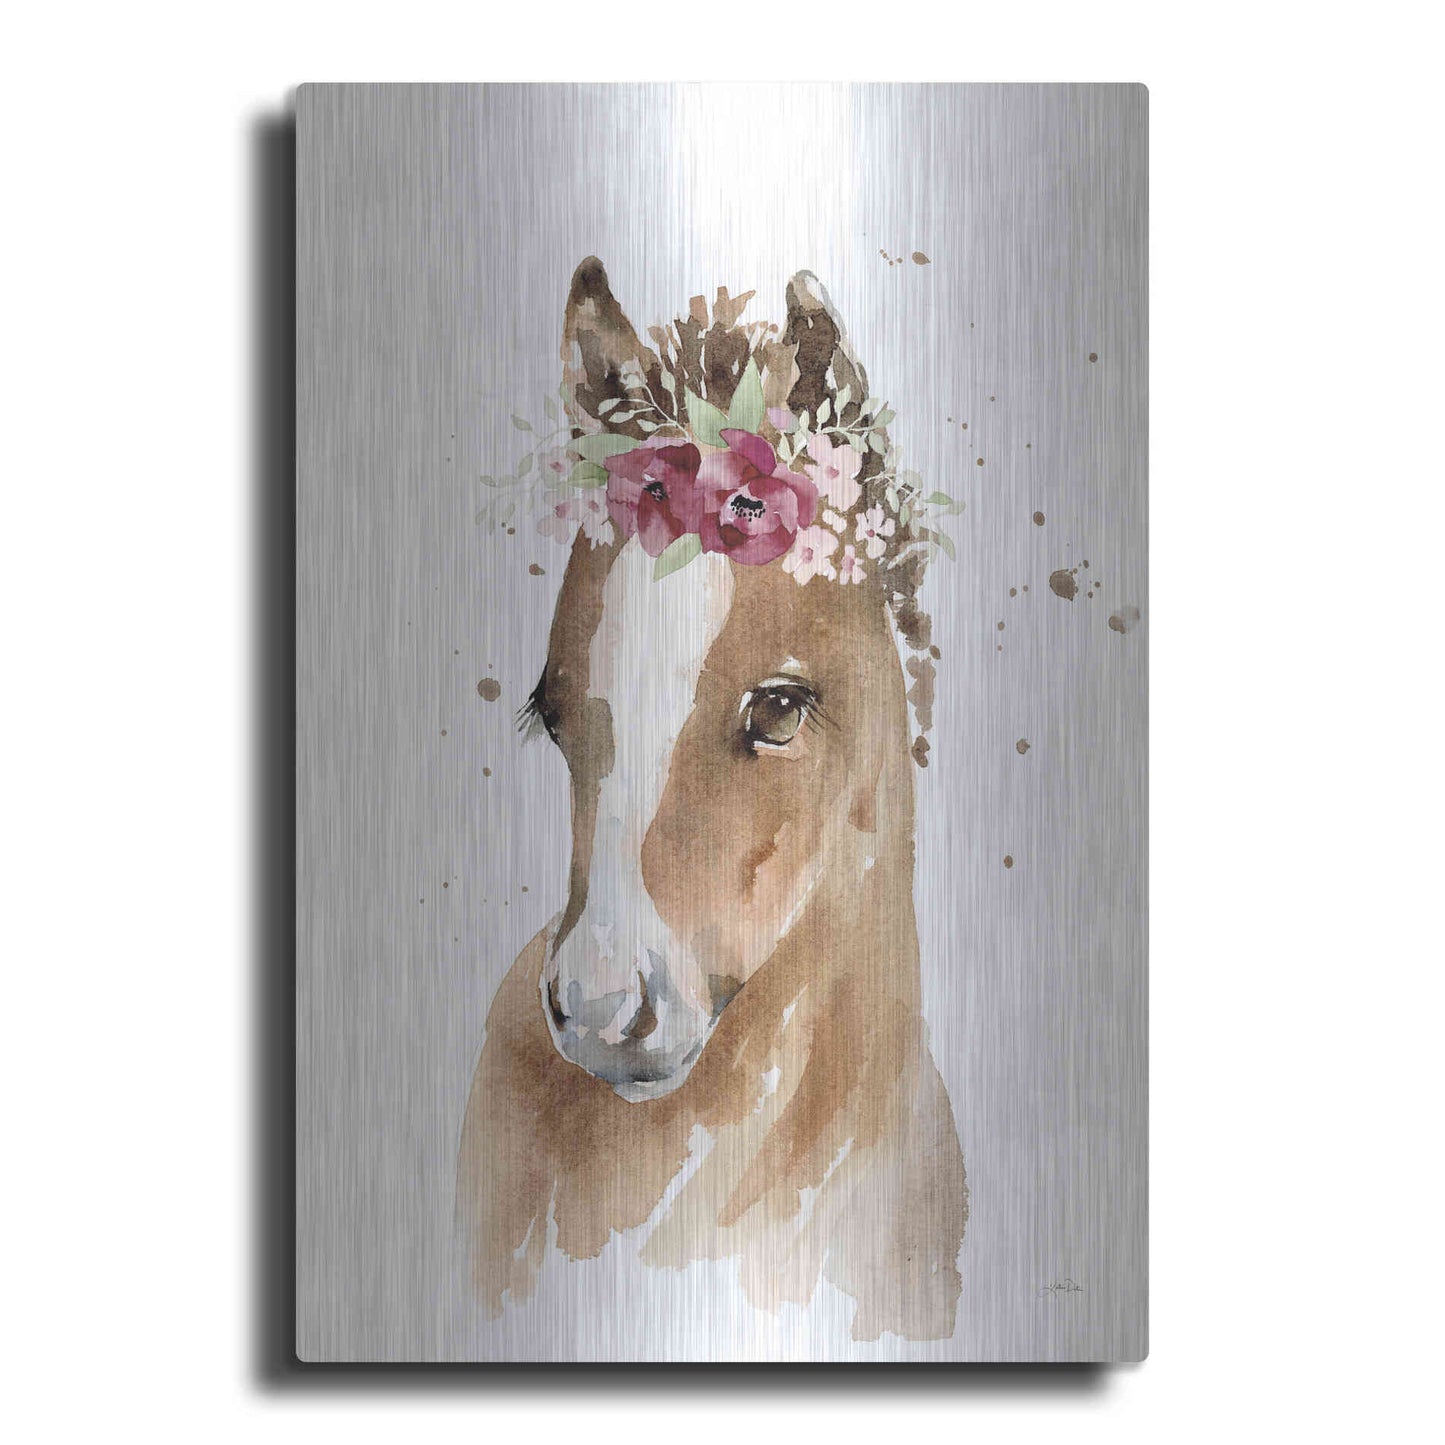 Luxe Metal Art 'Floral Pony' by Katrina Pete, Metal Wall Art